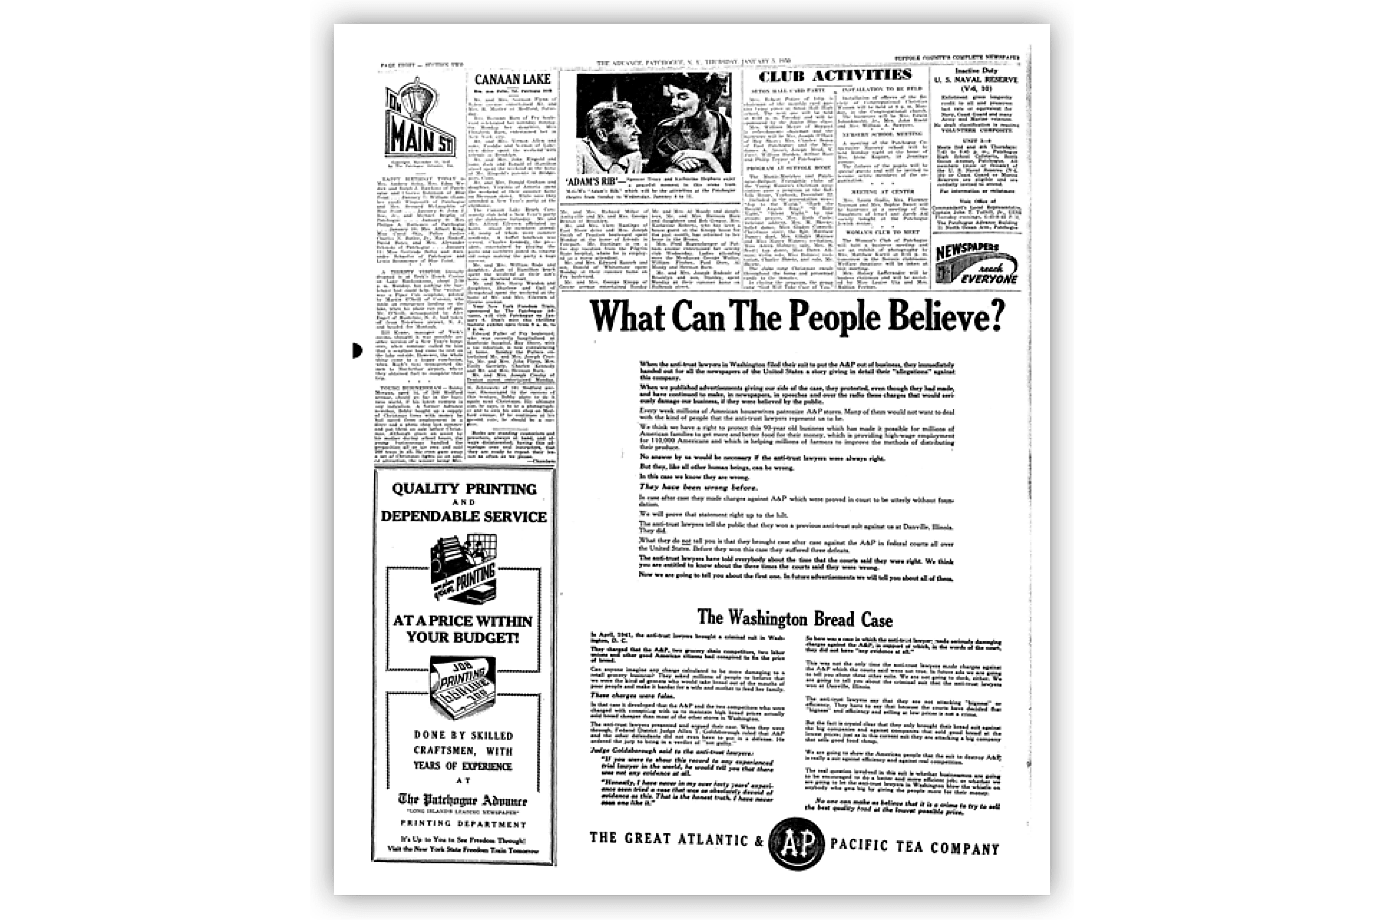 "What Can the People Believe?" Newspaper Ad